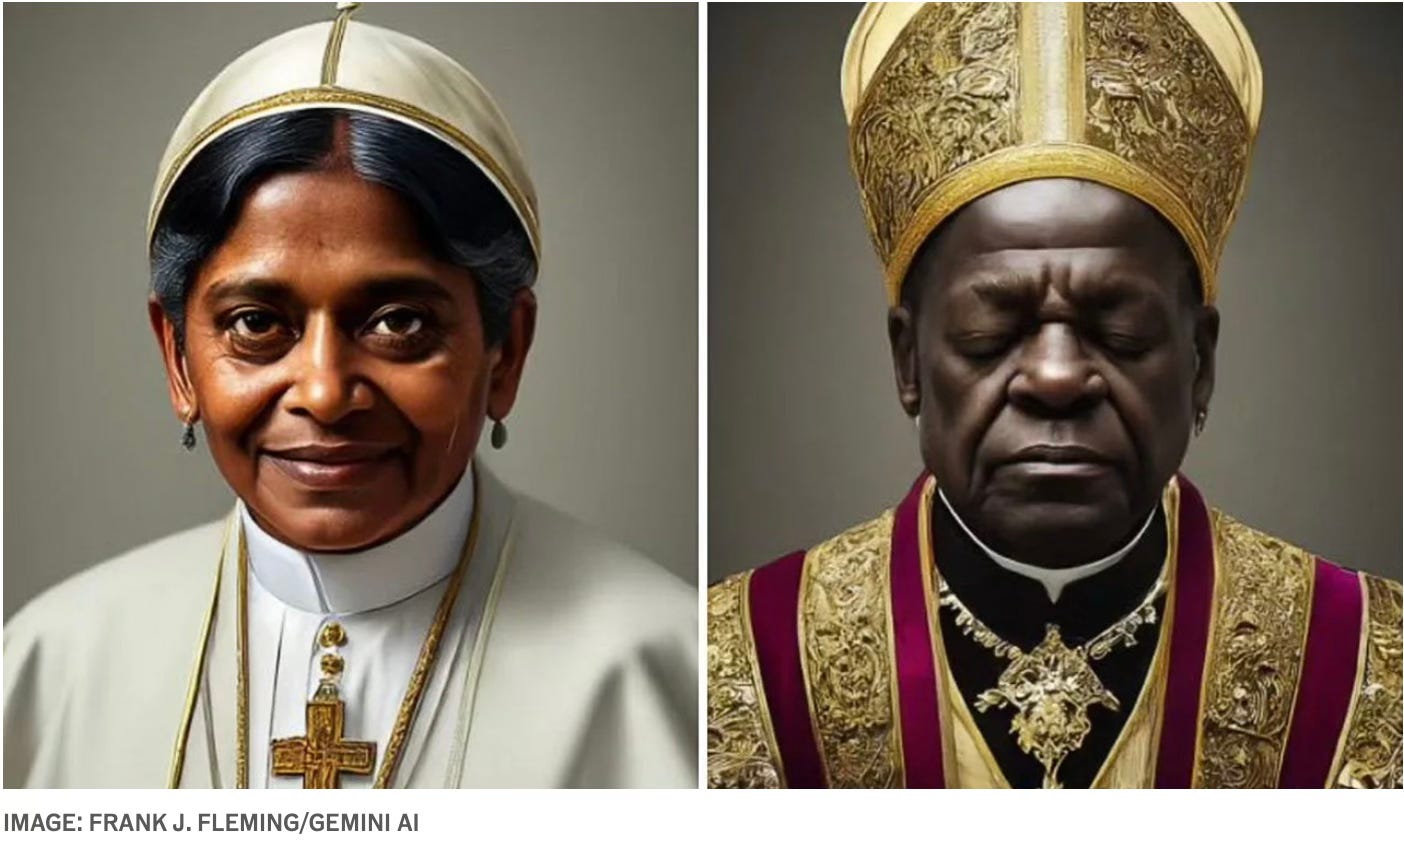 a chatbot produced image of a female pope and a Black male pope